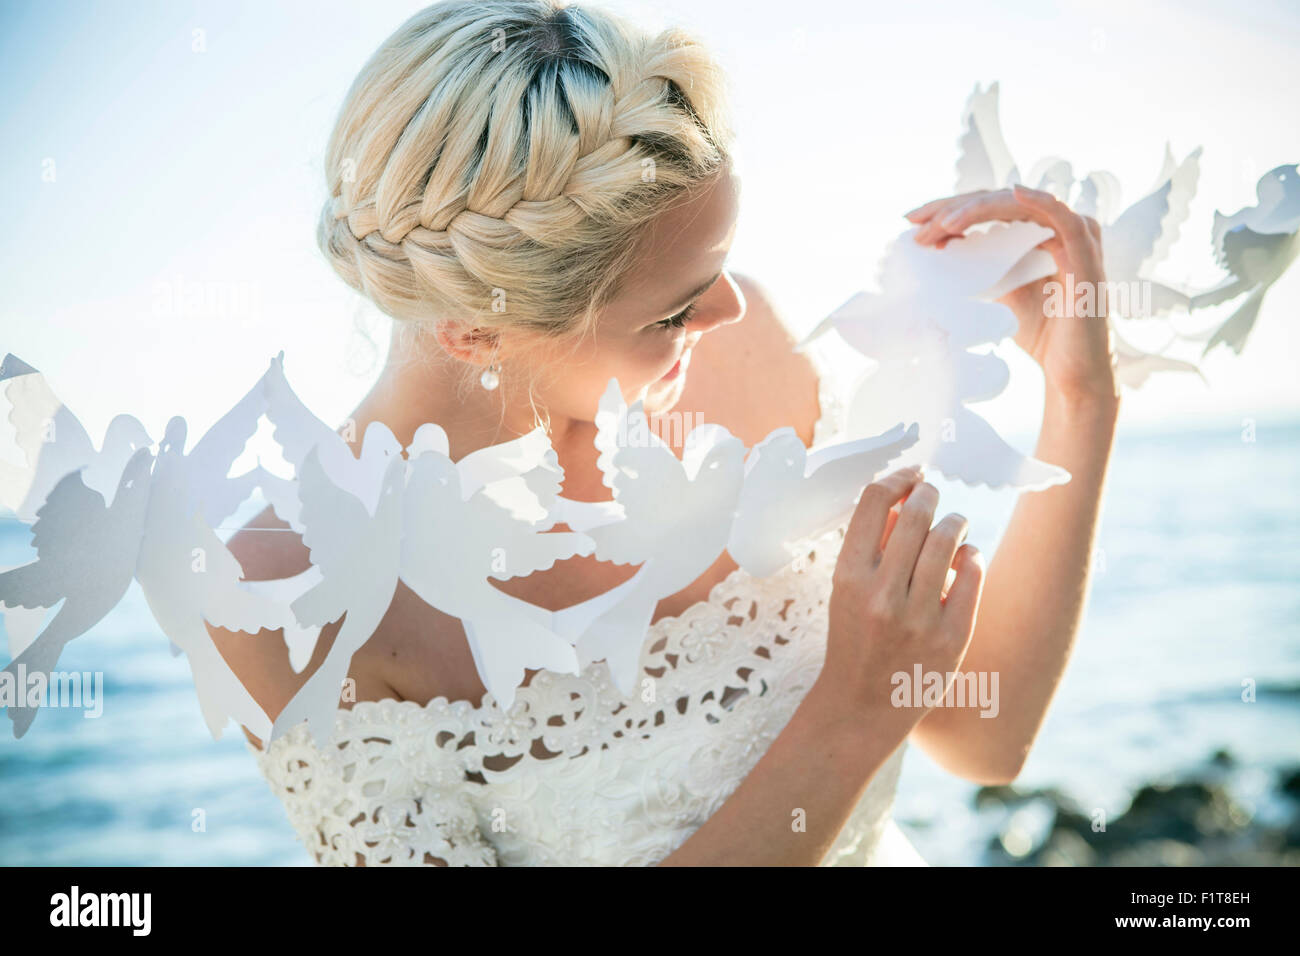 Bride playing with white paper cut out outdoors Stock Photo